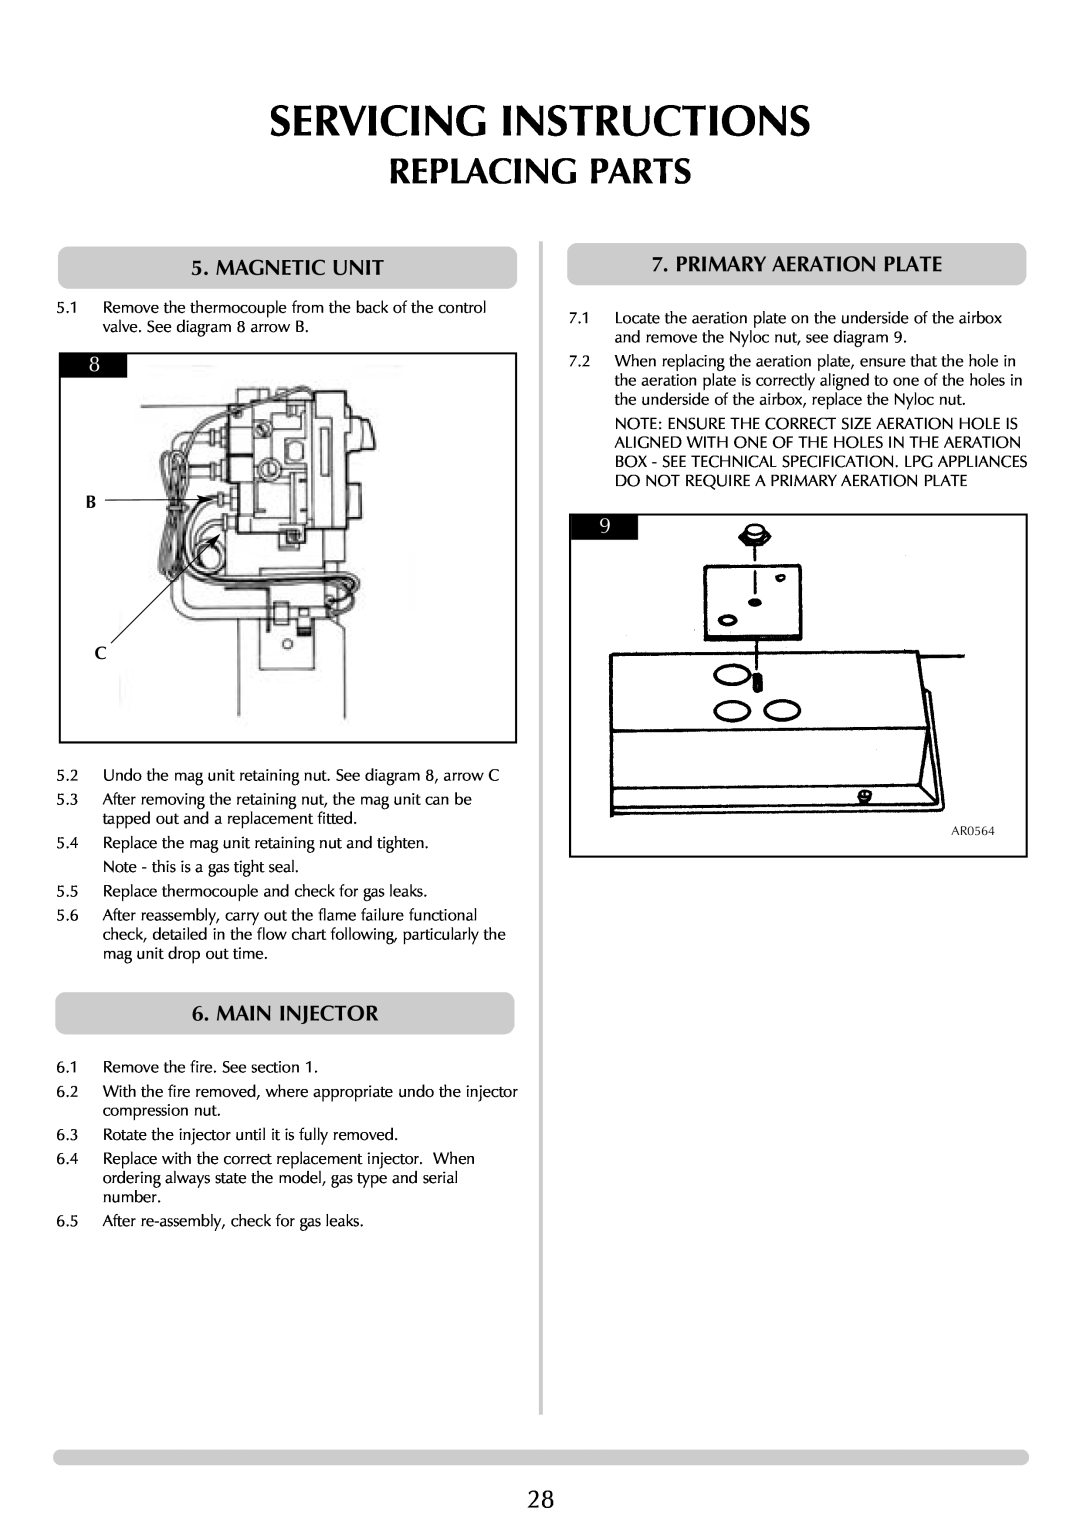 Stovax (P)8135**UC manual Servicing Instructions, Replacing Parts, Magnetic Unit, Main Injector, Primary Aeration Plate 